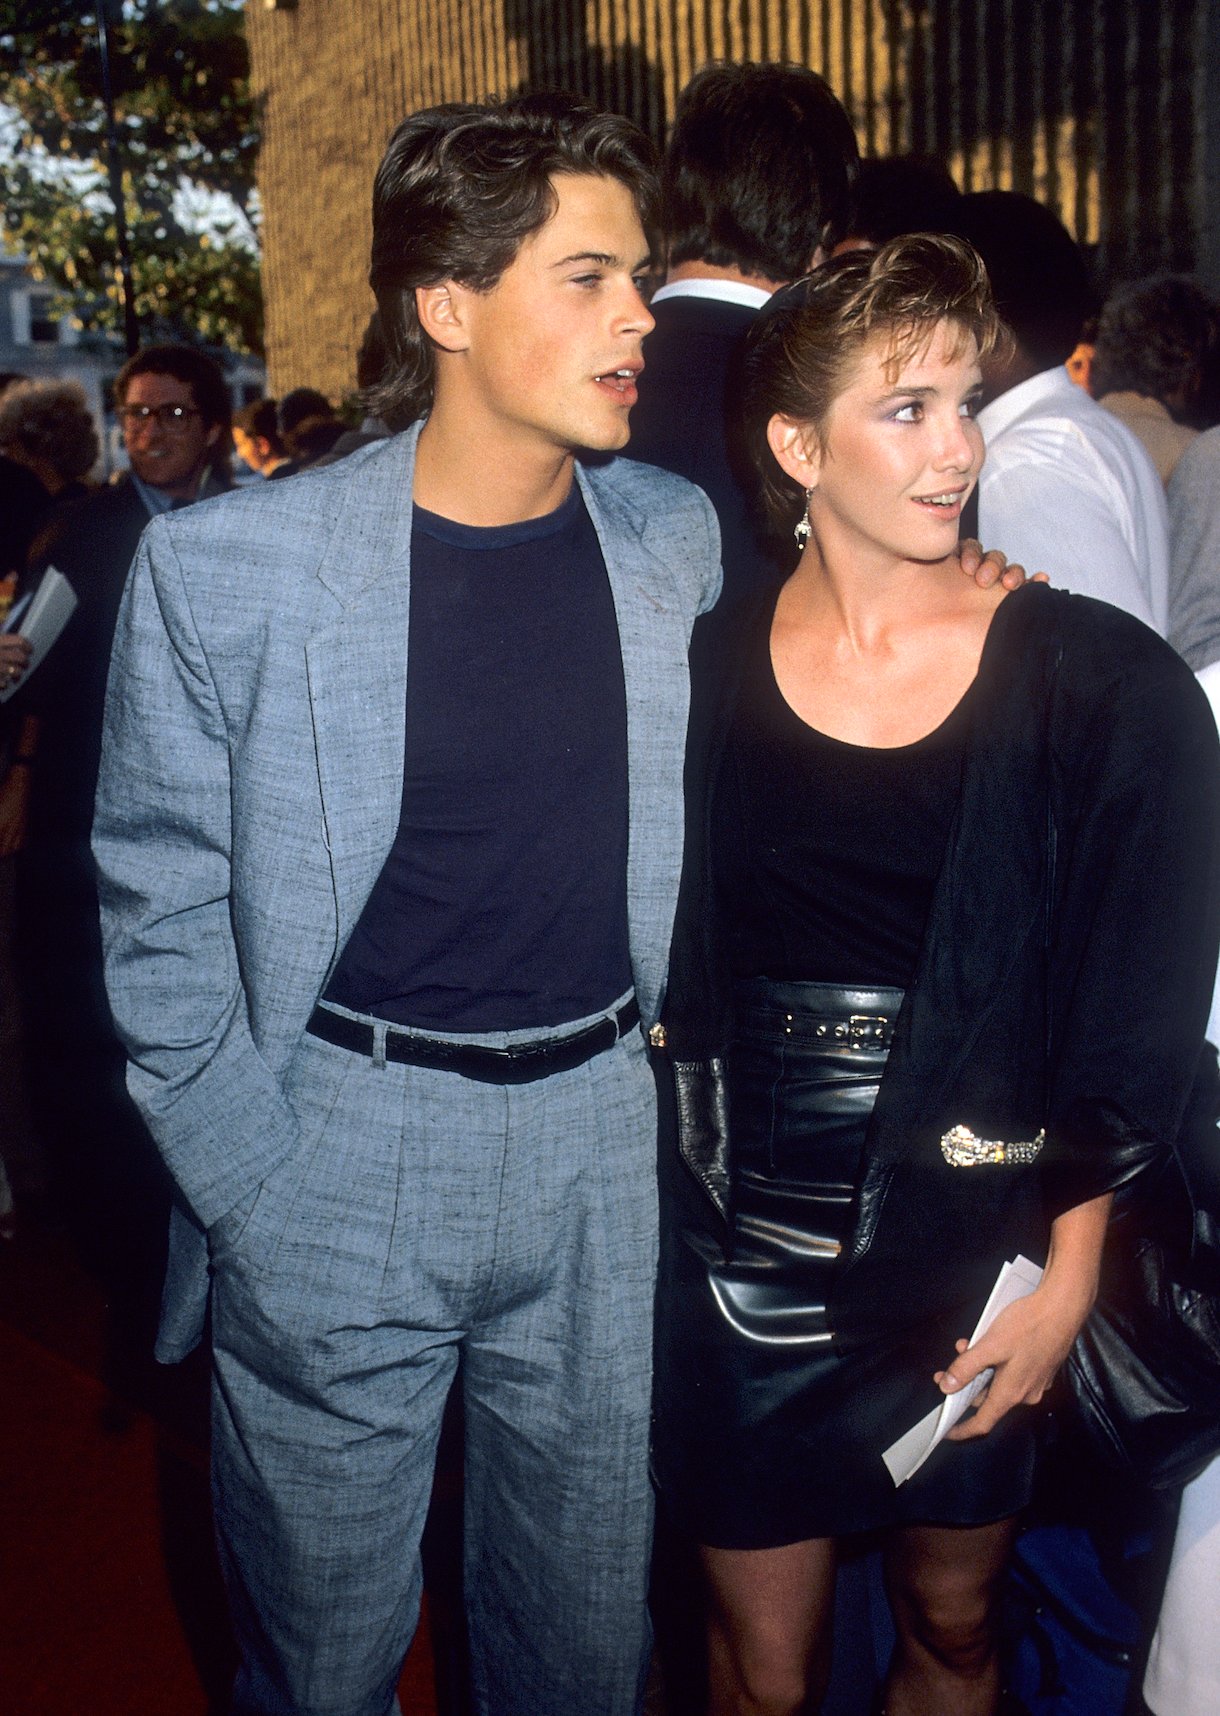 Rob Lowe and actress Melissa Gilbert attend the "Ghostbusters" Premiere on 1984